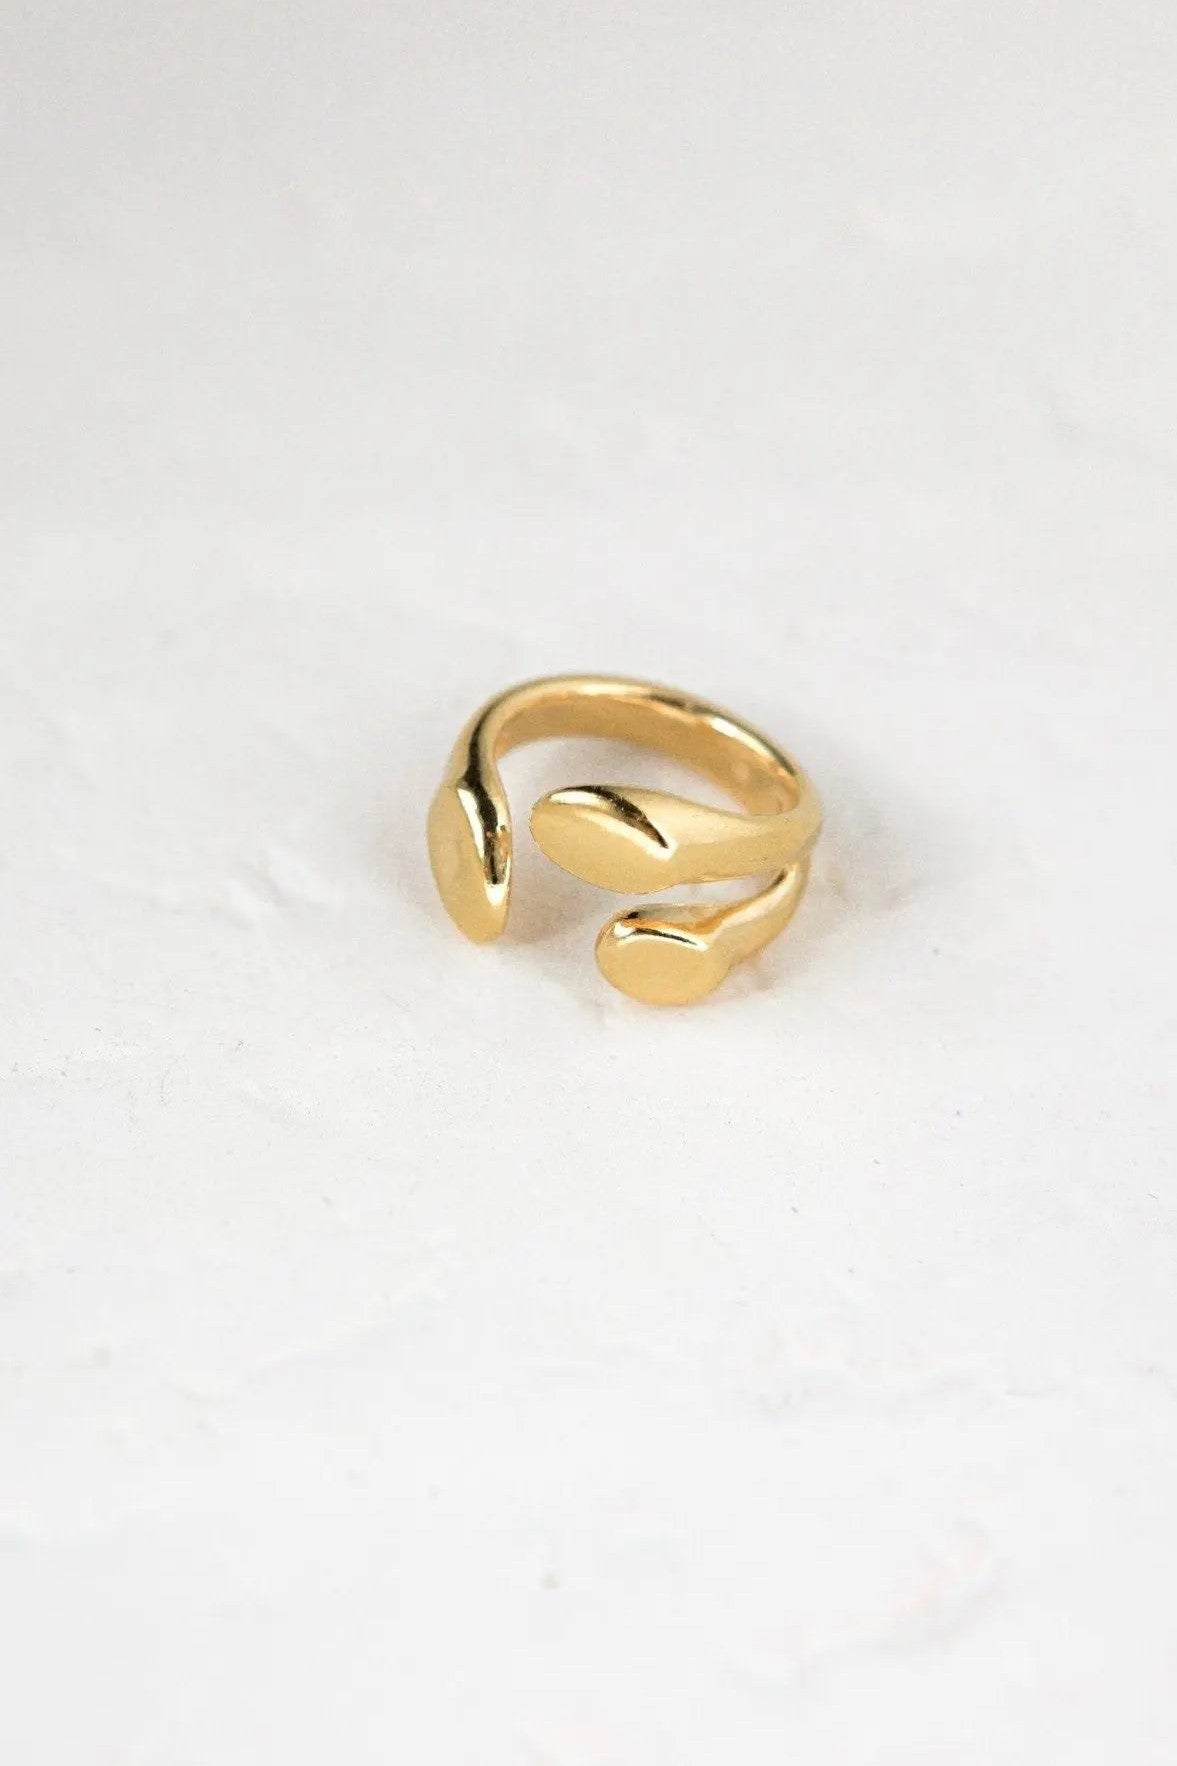 Greek Olive leaf ring, Grecian ring for women, Ethnic Boho Ring, Gold adjustable ring, 24K Gold plated ring, Greek jewelry